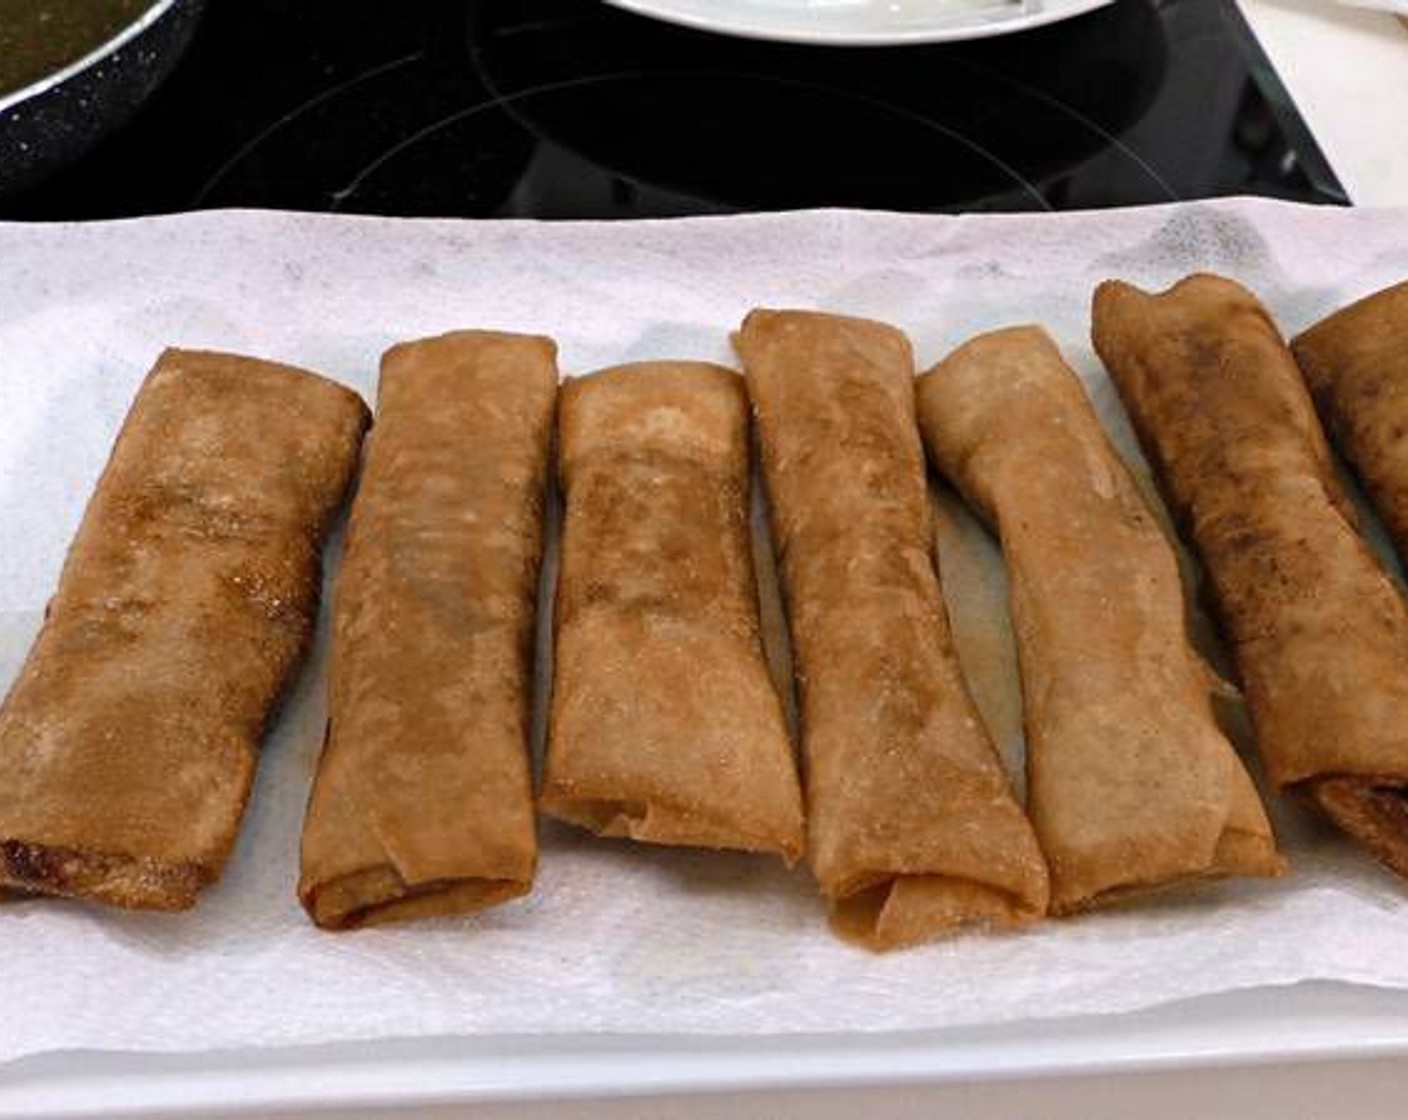 step 15 Once the spring rolls are golden brown and crispy, remove them and place on a paper towel to absorb the excess oil.